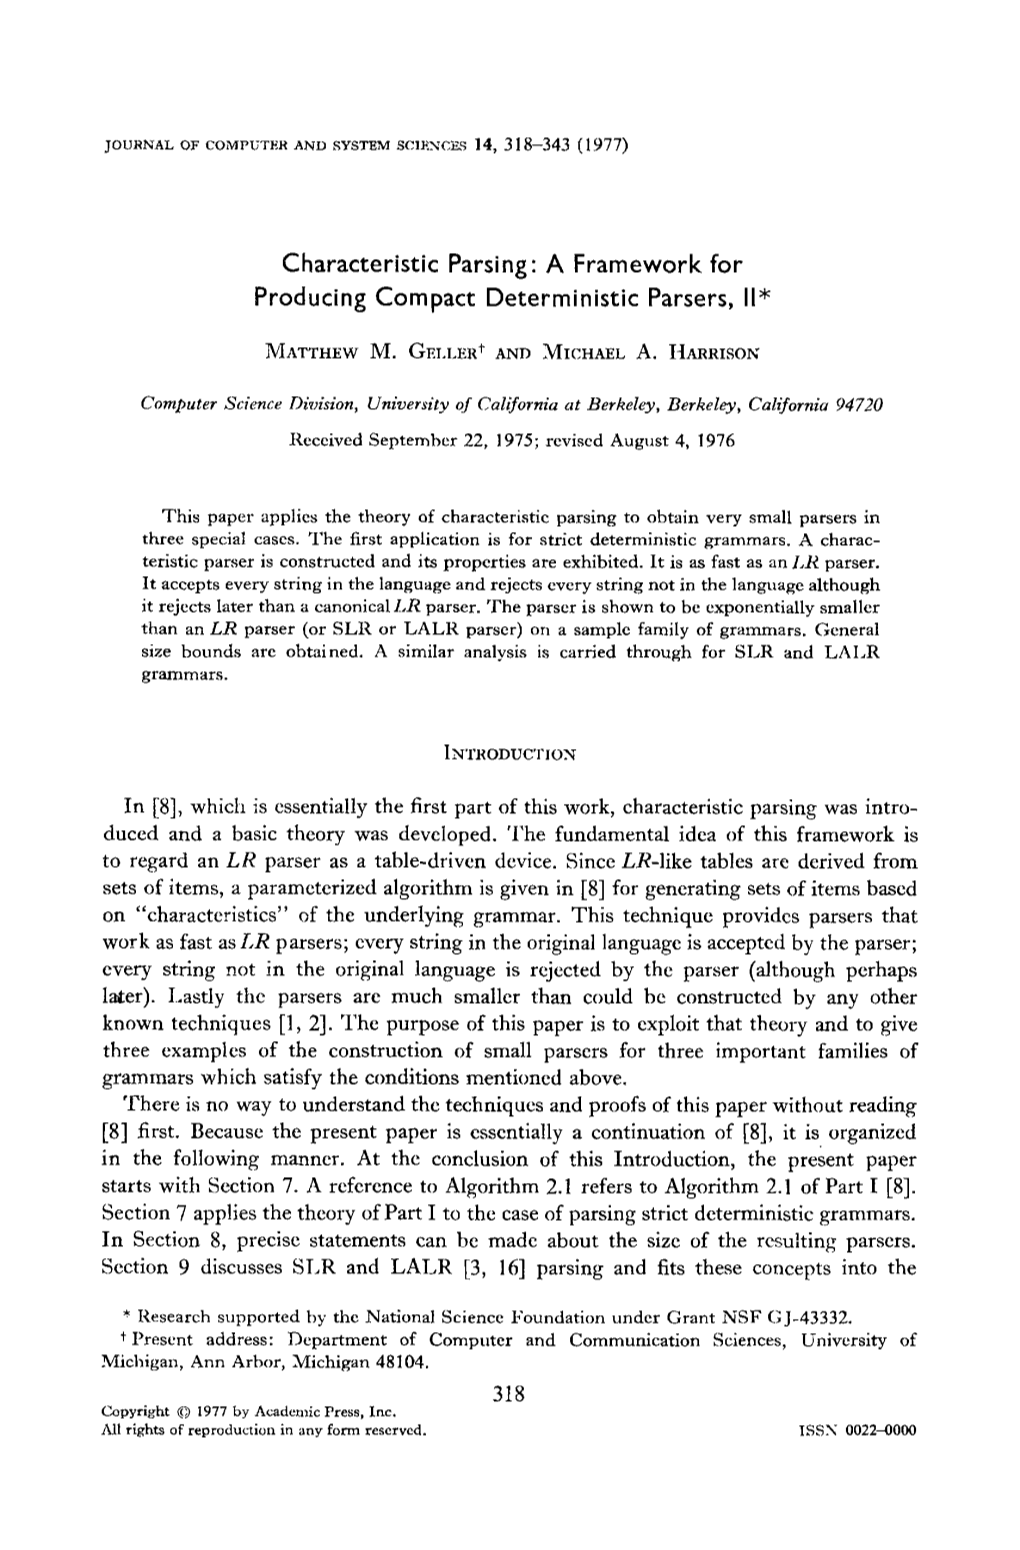 Characteristic Parsing: a Framework for Producing Compact Deterministic Parsers, I1"